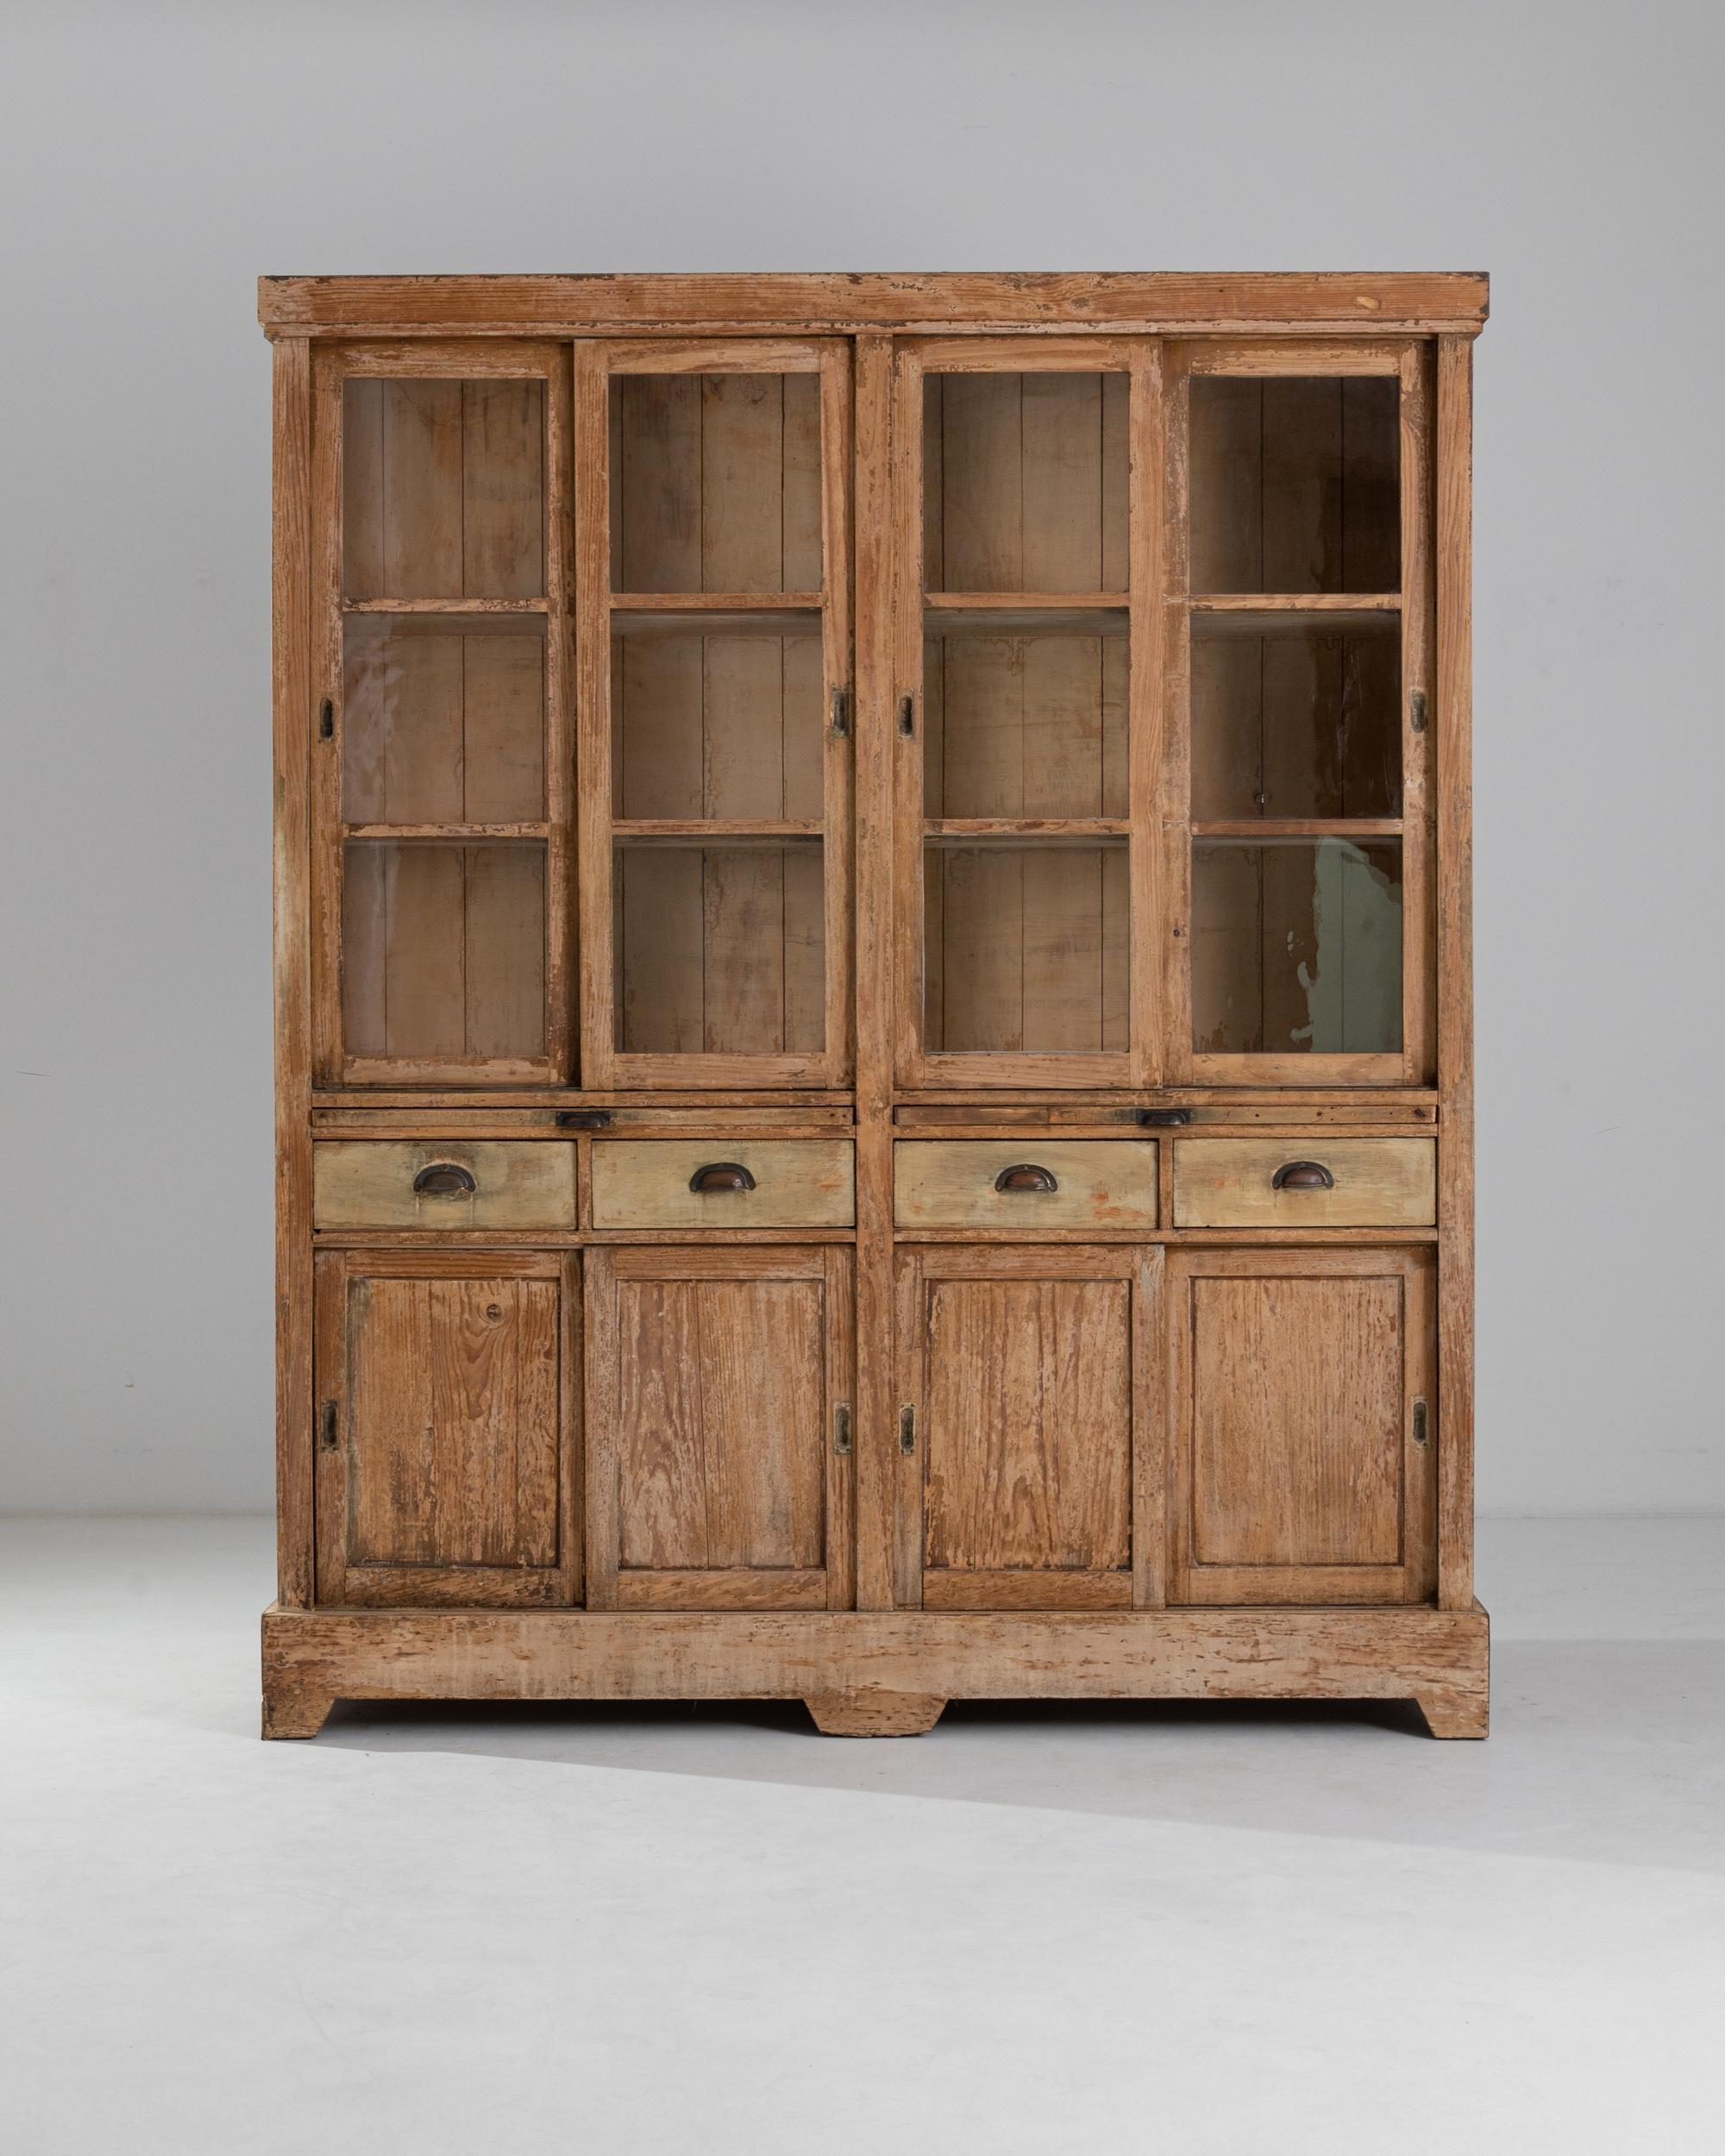 With its warm patina and handsome silhouette, this wooden vitrine offers an attractive antique showcase. Made in Portugal in the 1800s, the glass panes of the upper cabinet provide a window onto precious objects displayed on the shelves within.